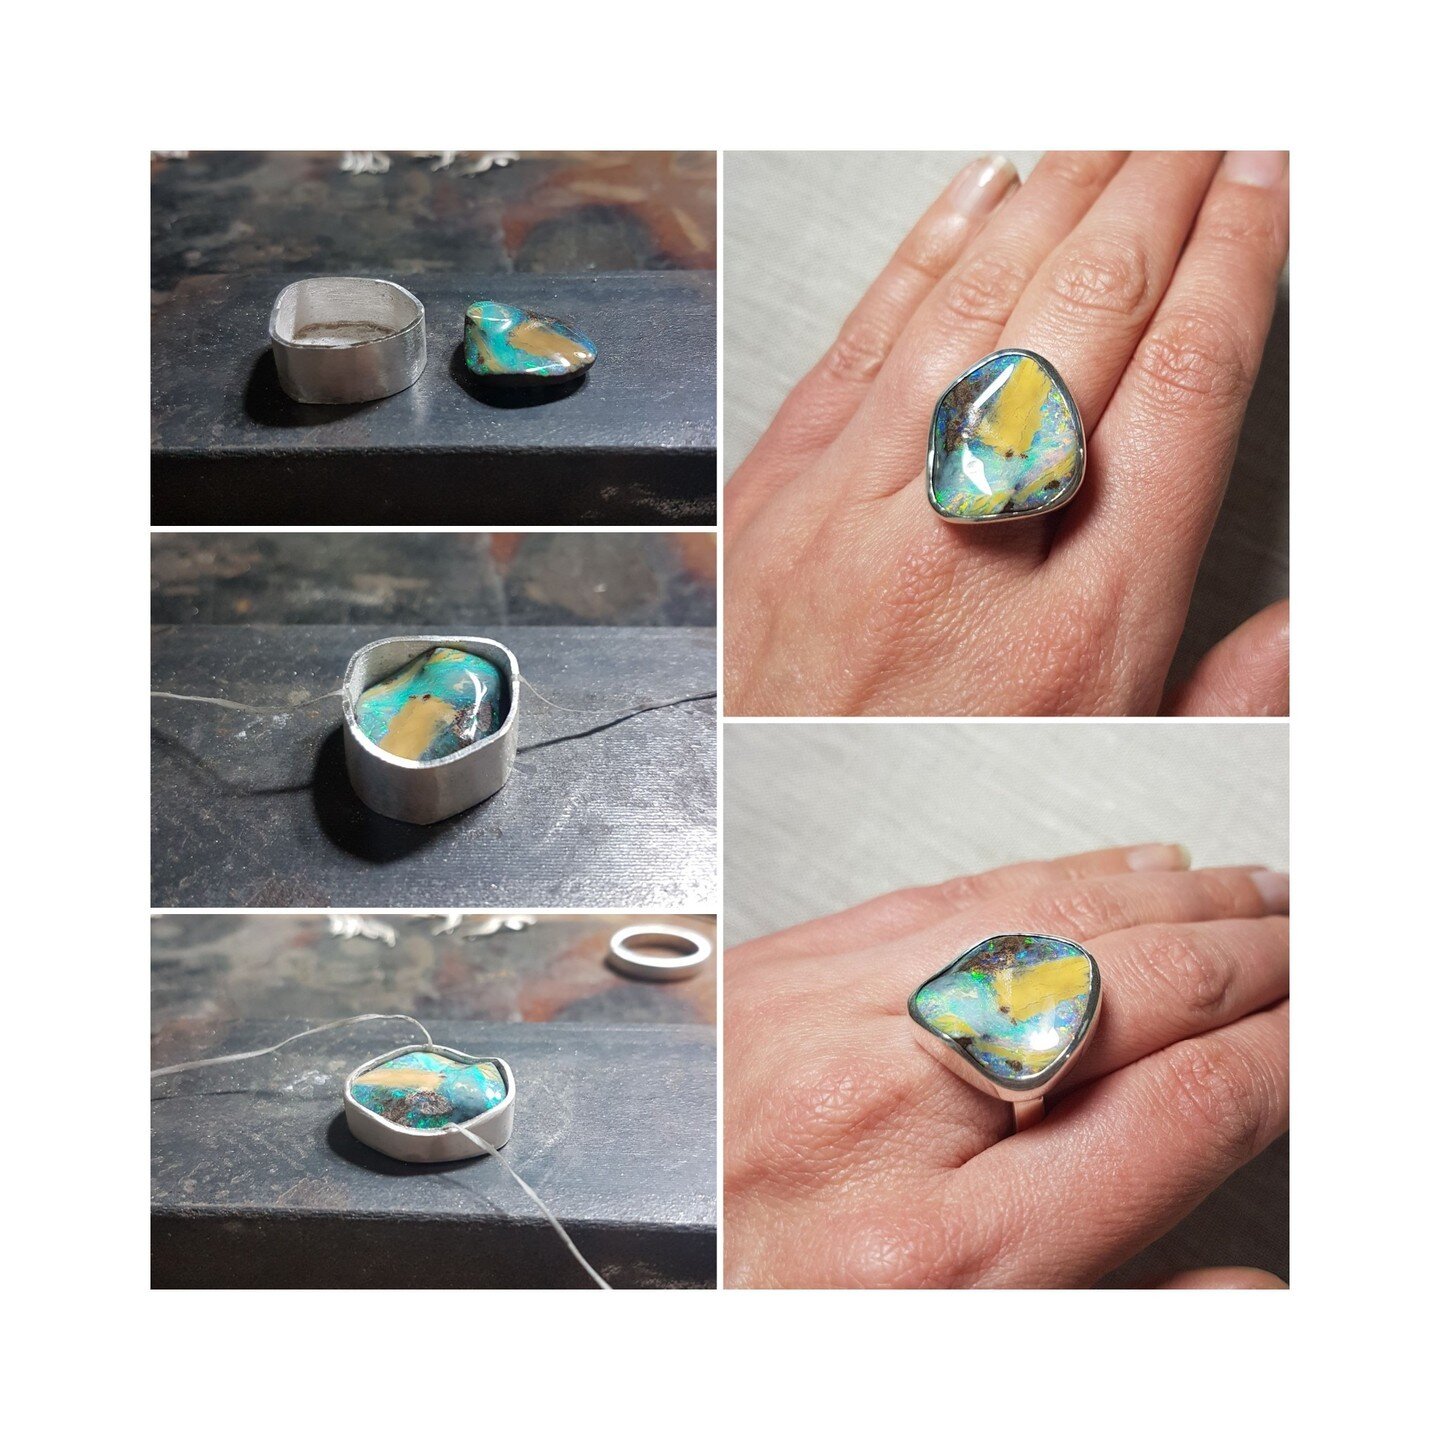 F L A S H B A C K to a custom boulder opal ring we made a while back. A real statement piece this one 😍

#customjewellery #handcrafted #opaljewellery #boulderopal #sustainablejewellery